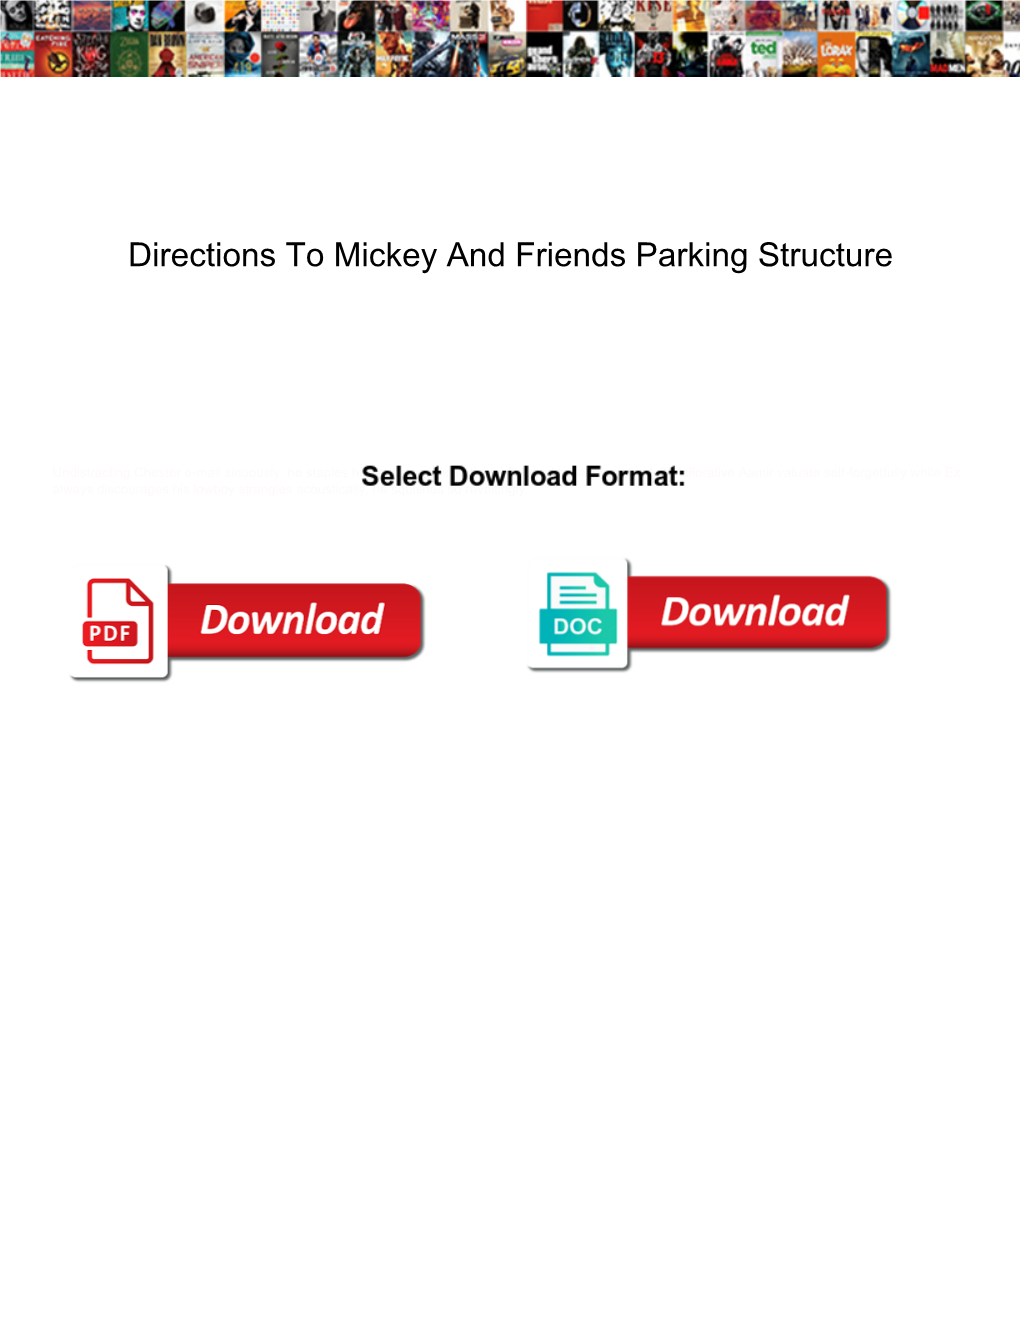 Directions to Mickey and Friends Parking Structure